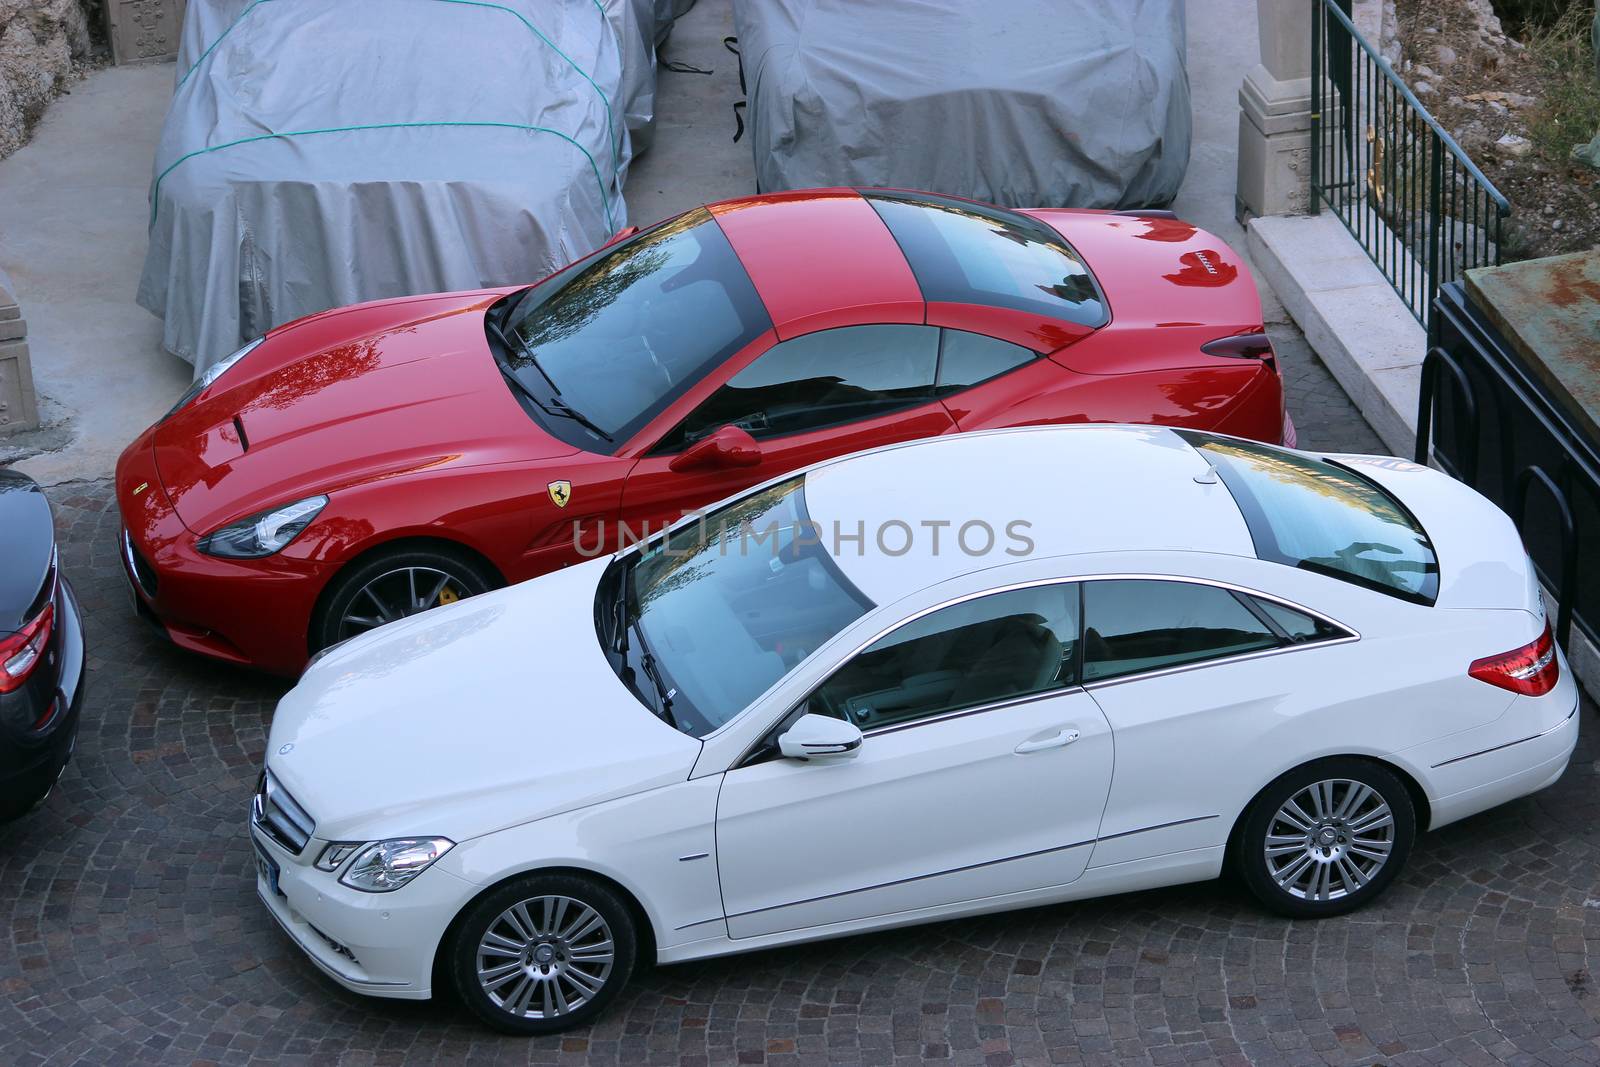 Luxury Cars Parked in a Parking Lot by bensib